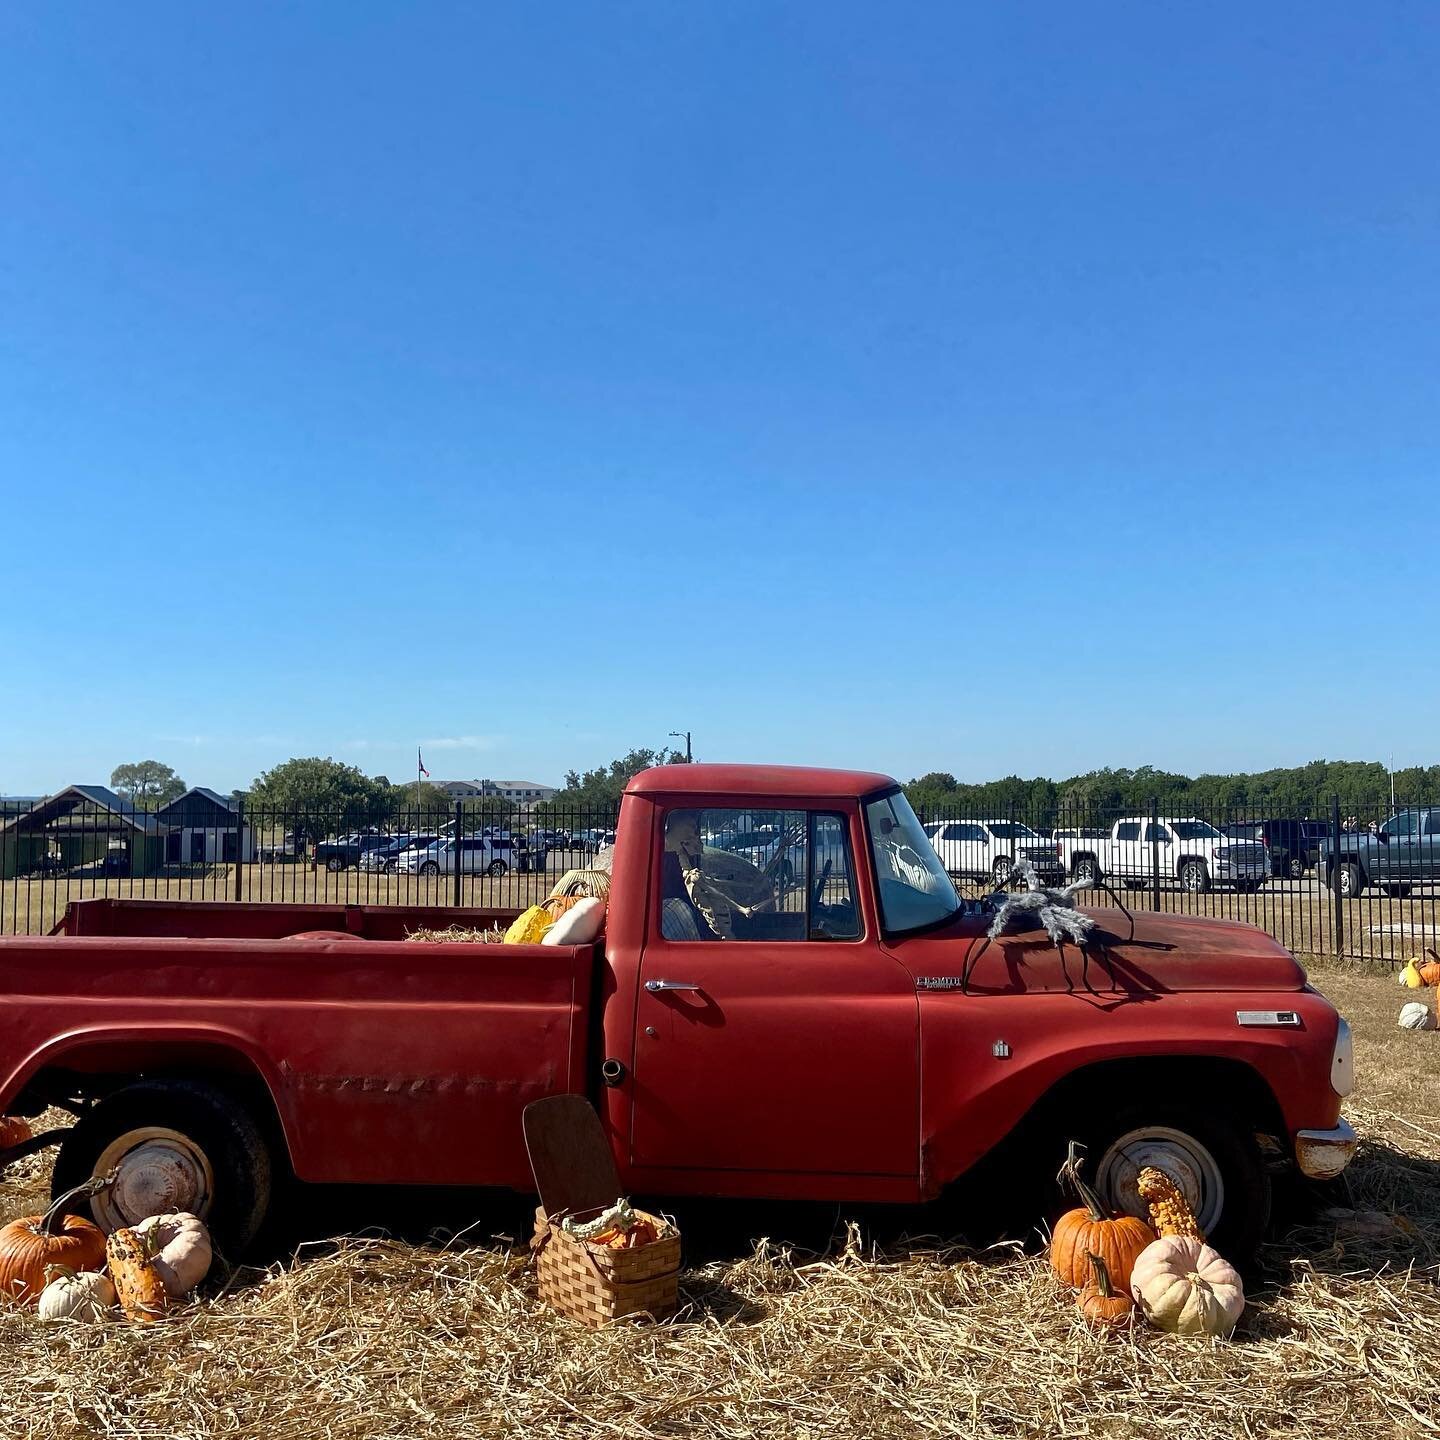 The @drippingspringspumpkinfest is now open! Come pick your pumpkin and take advantage of the amazing photo ops all over our historic site on the Farmstead!
#pumpkinpatch 
#fallphoto 
#drippingsprings